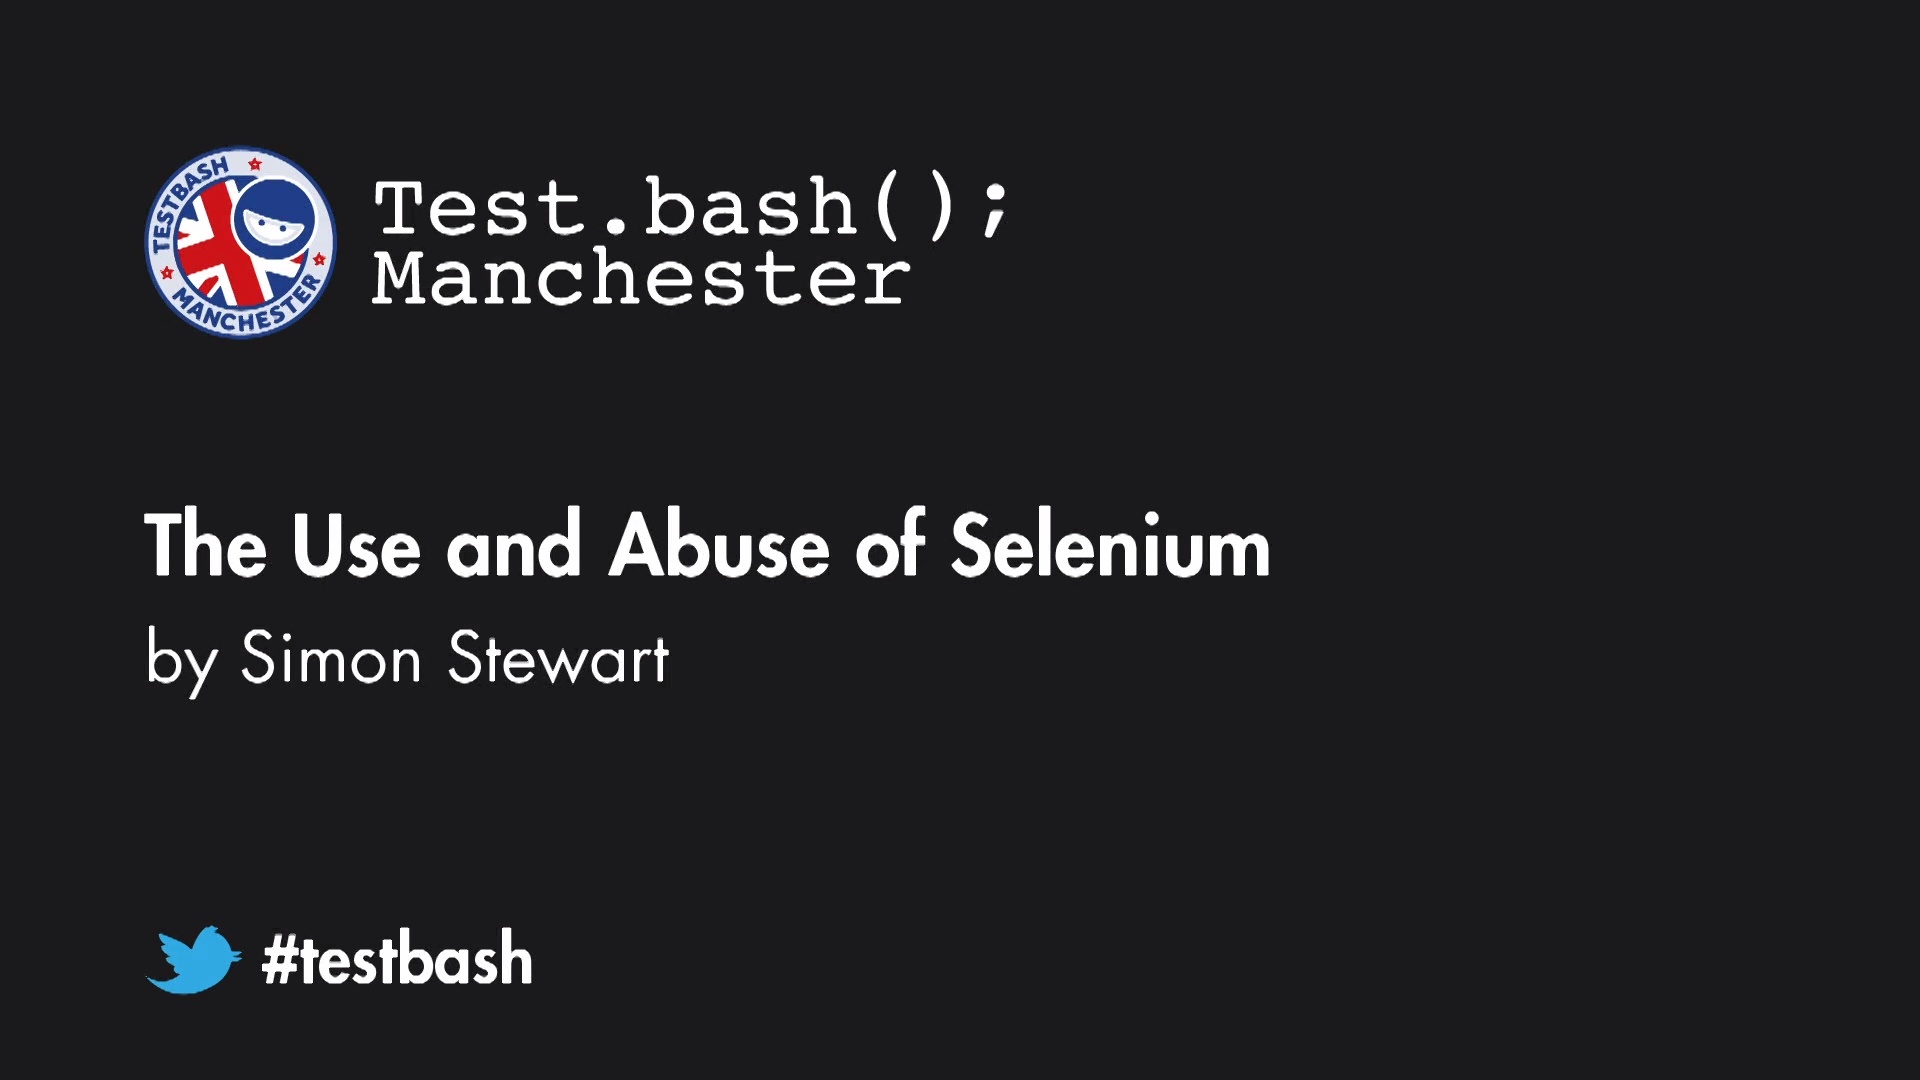 The Use and Abuse of Selenium - Simon Stewart